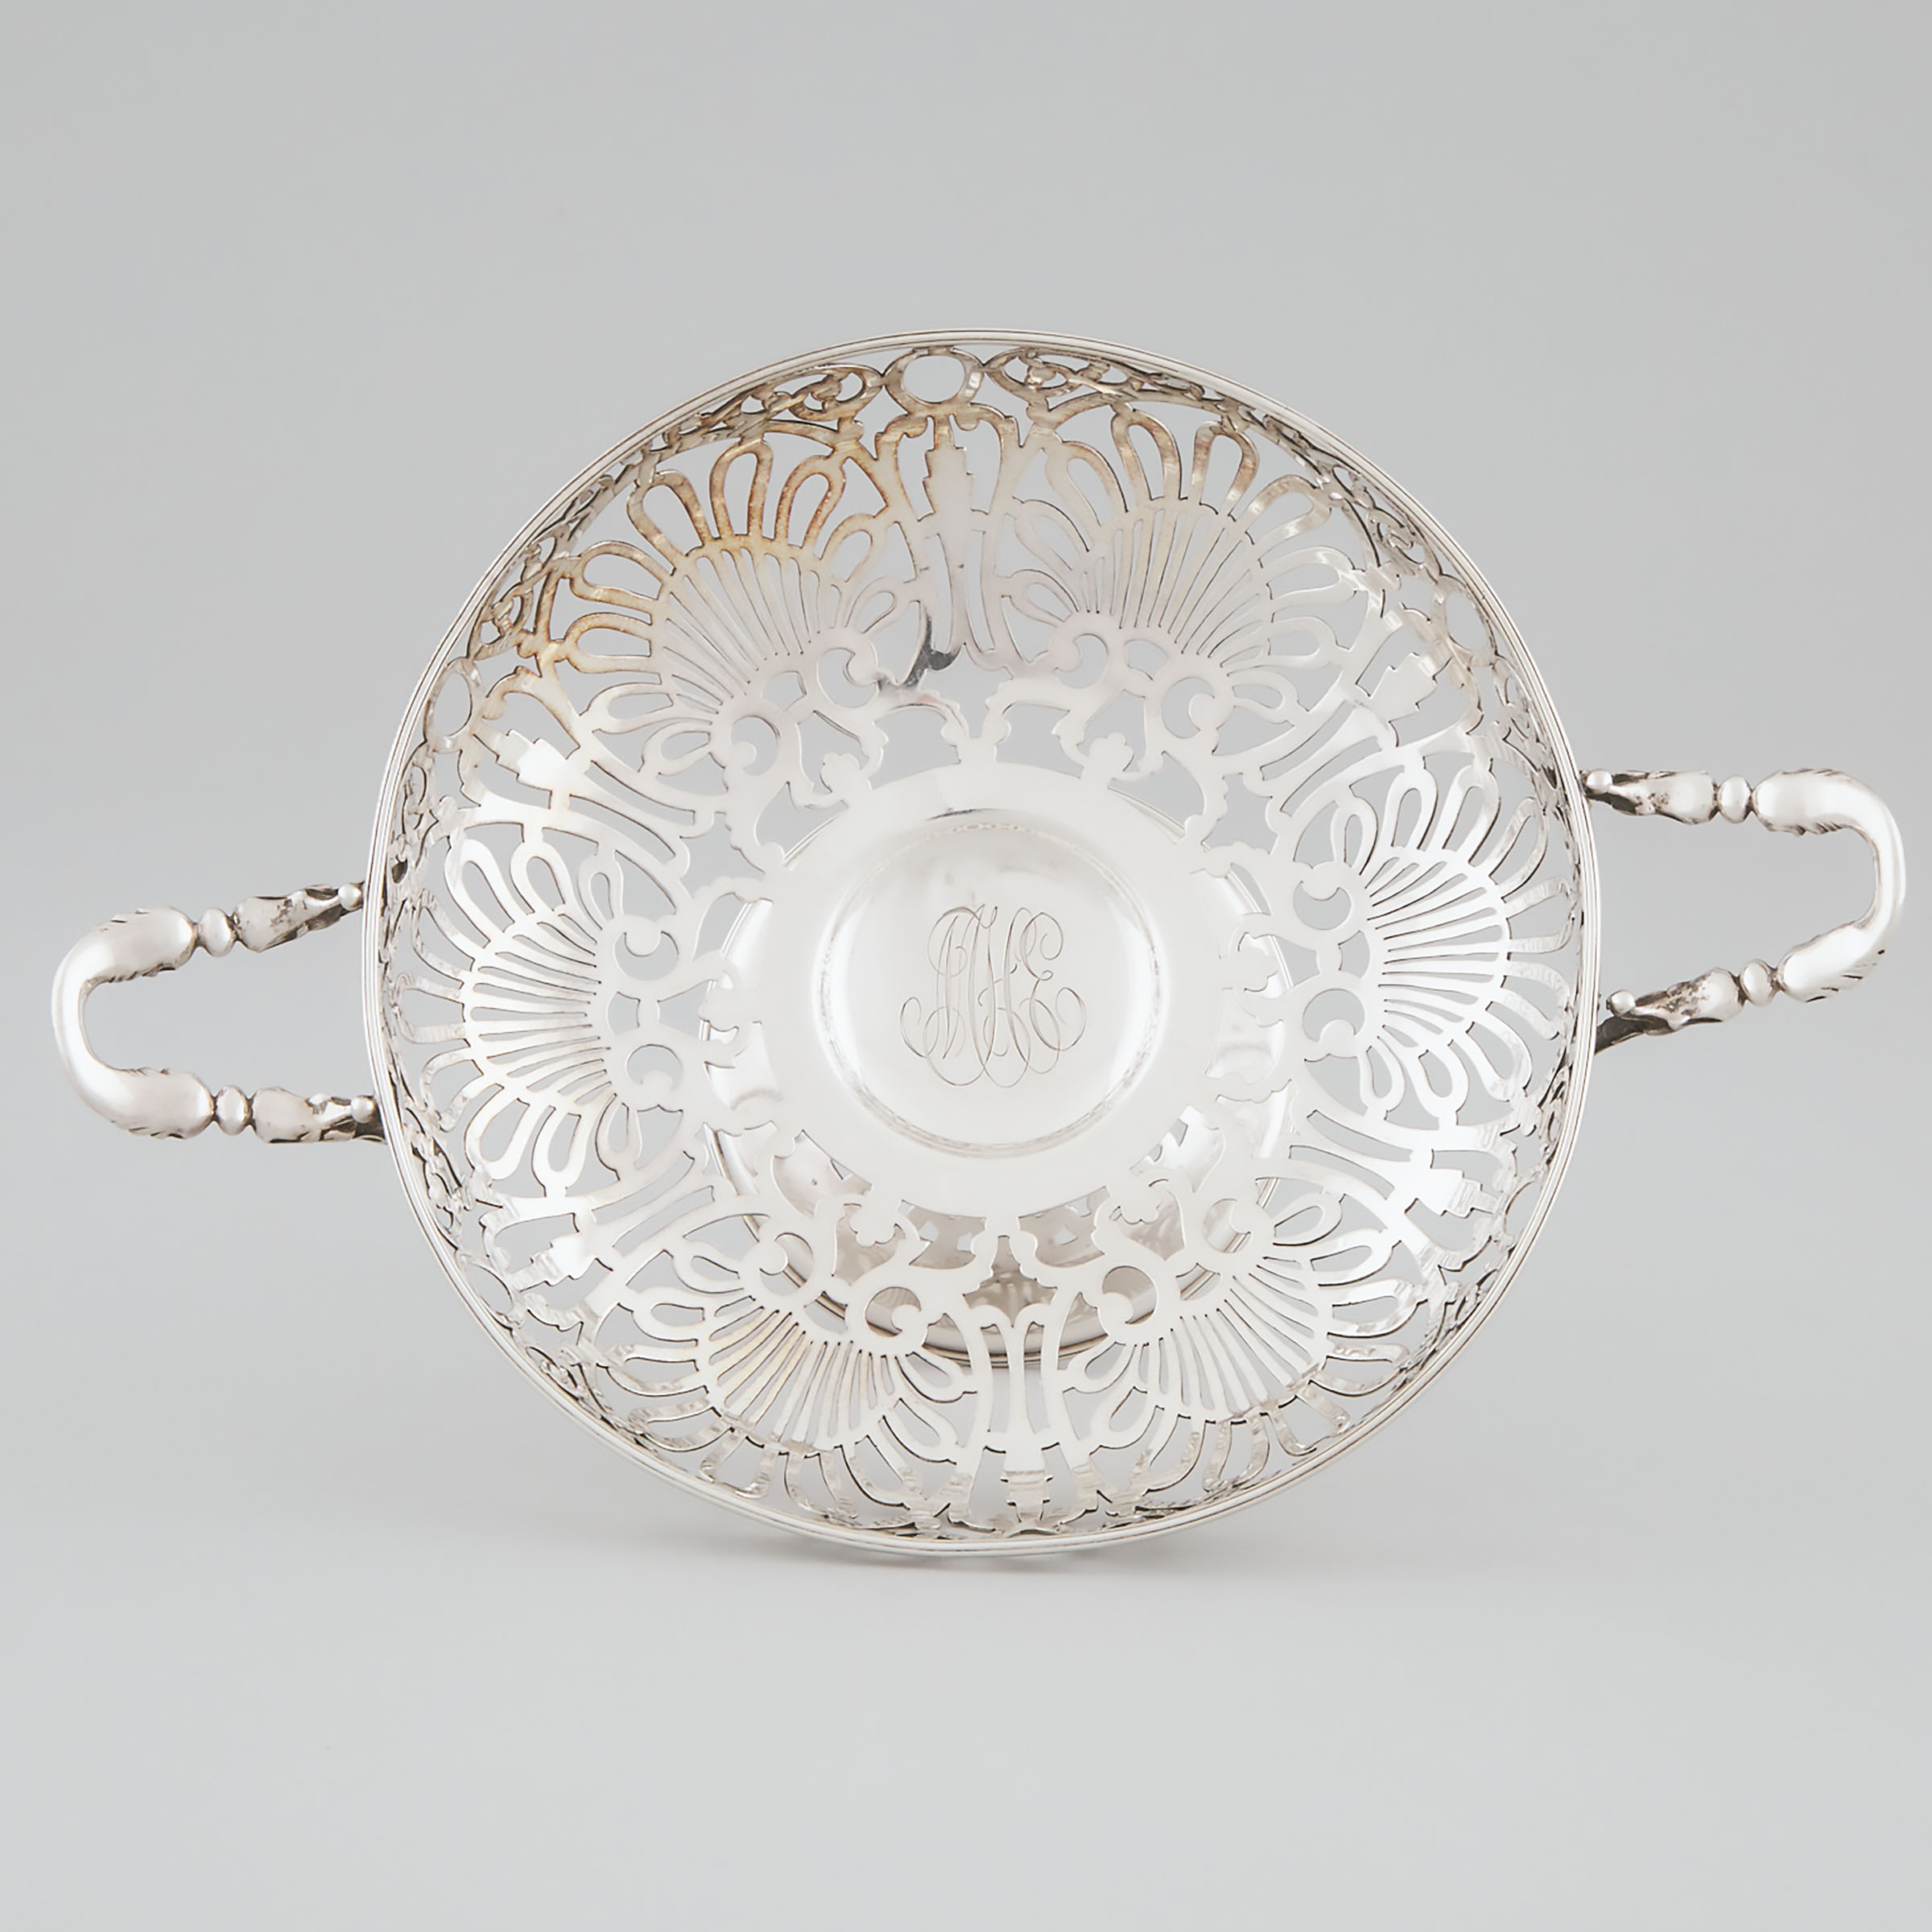 American Silver Pierced Footed Comport, Black, Starr & Frost, New York, N.Y., c.1900